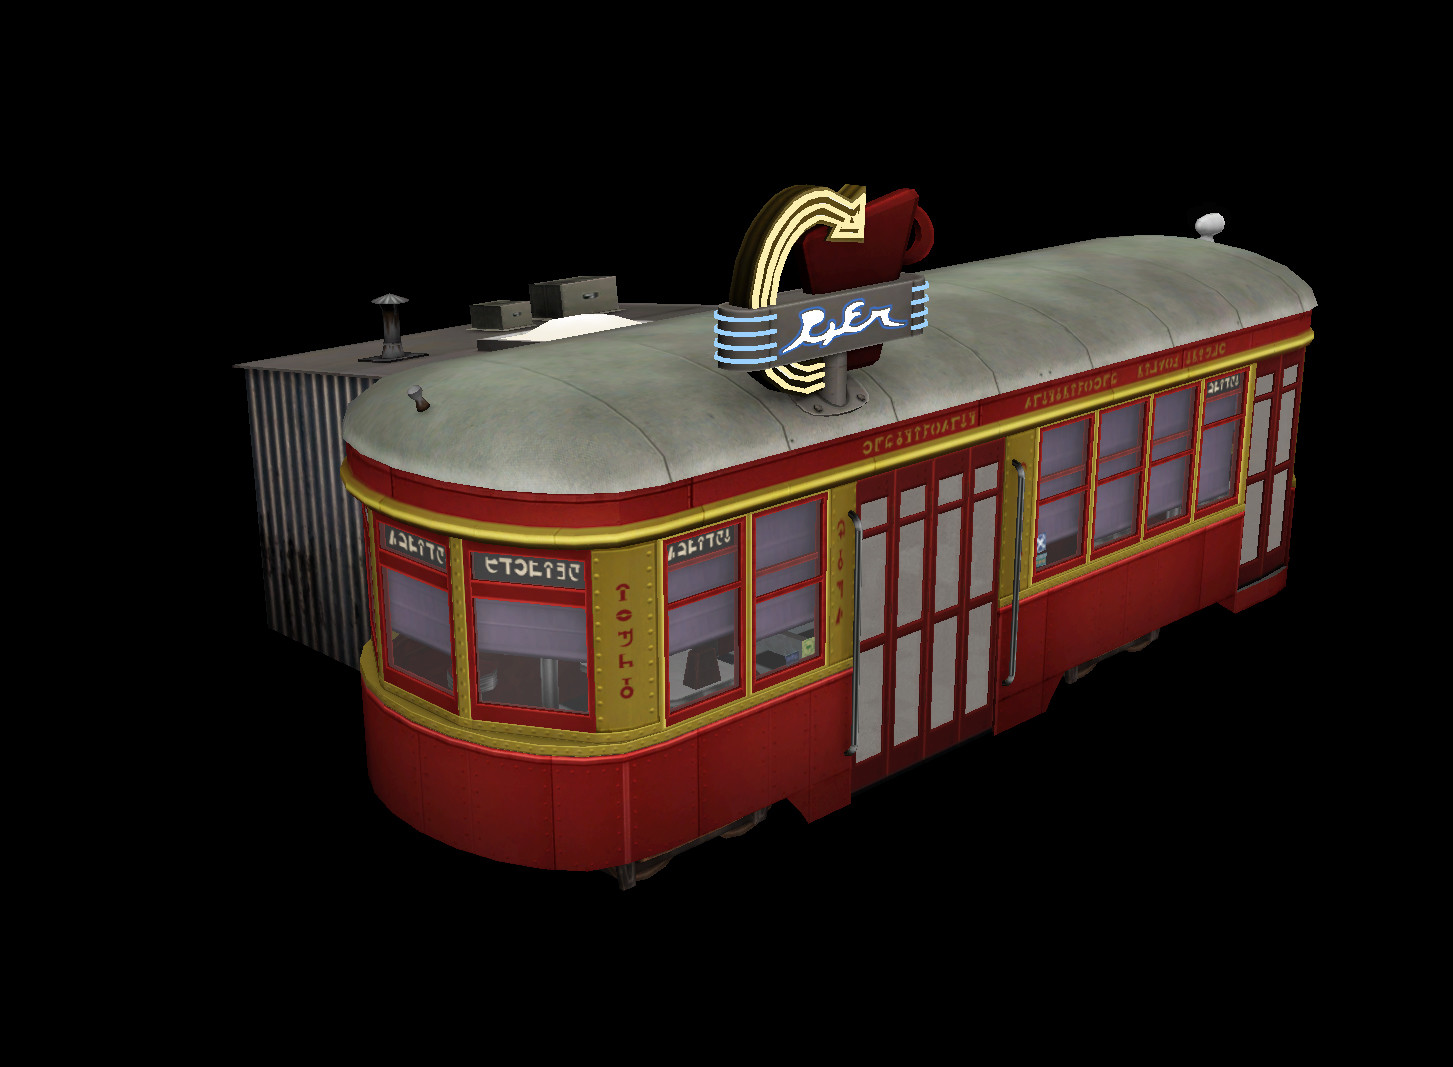 The Sims Streetcar Diner